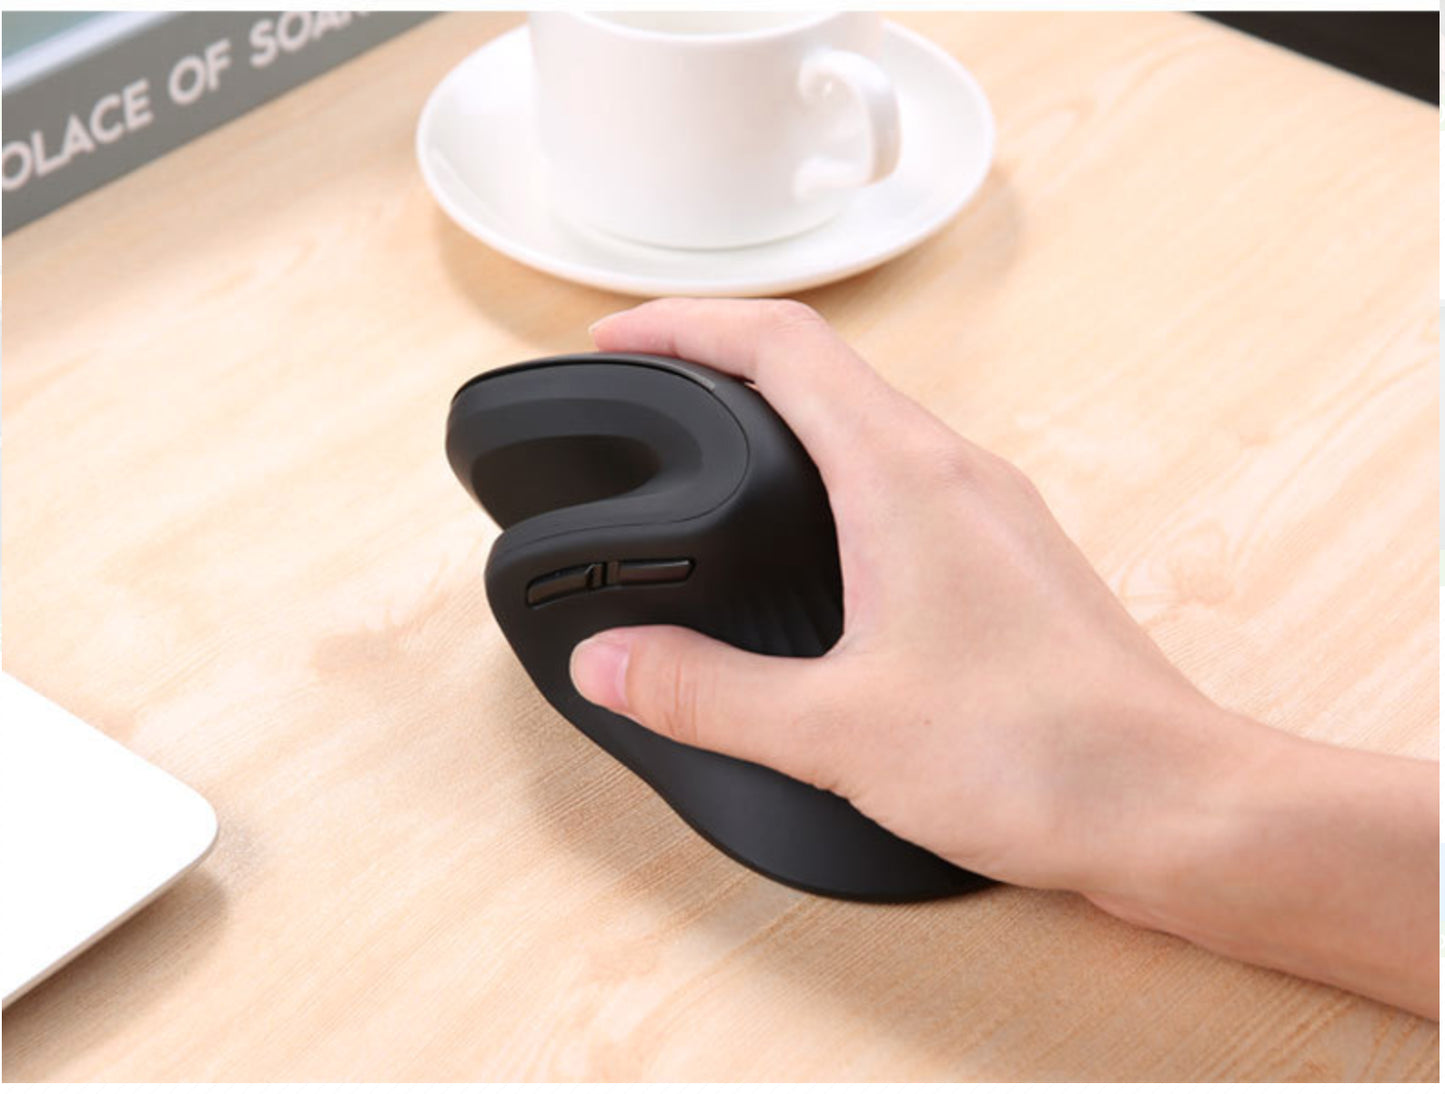 Ergonomic Wireless Vertical Mouse with 6 Buttons and Adjustable DPI